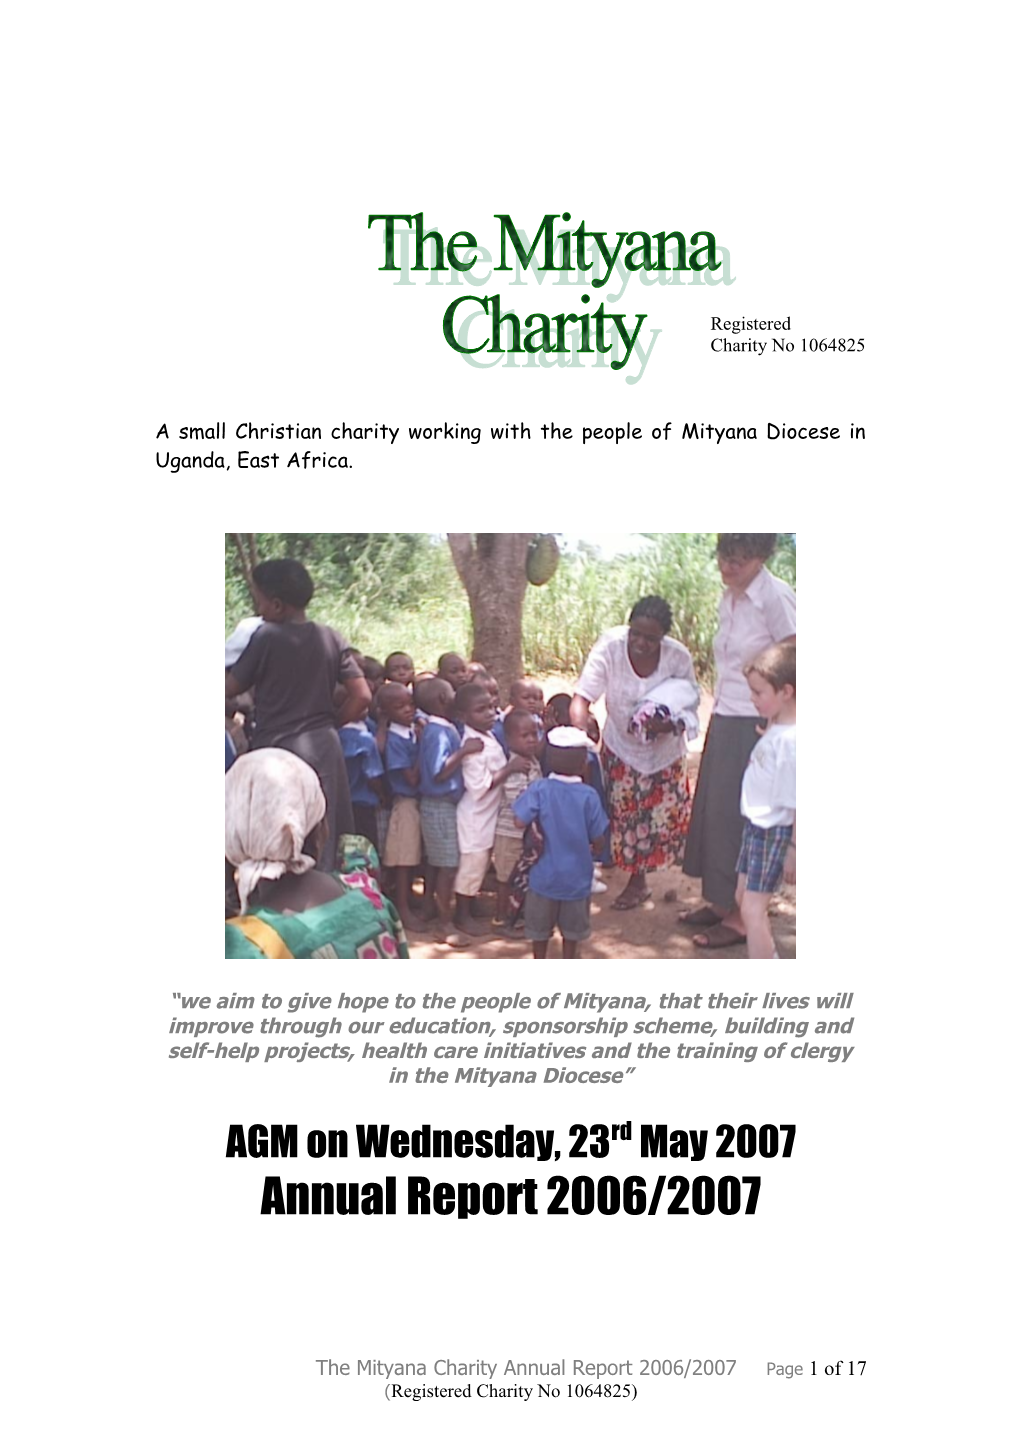 A Small Christian Charity Working with the People of Mityana Diocese in Uganda, East Africa